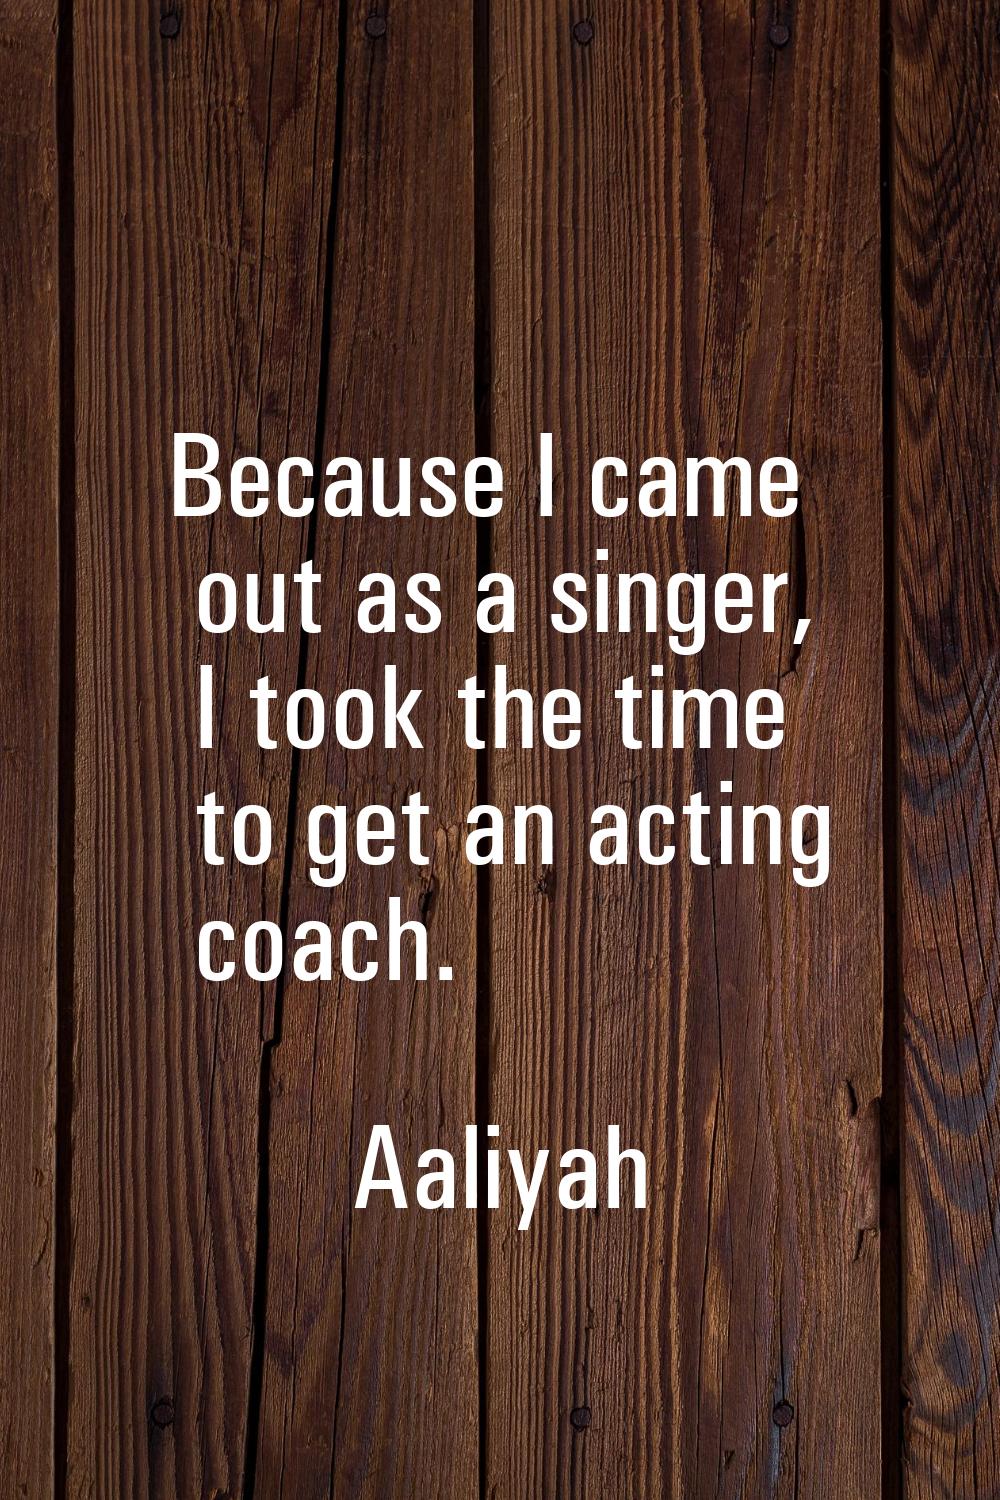 Because I came out as a singer, I took the time to get an acting coach.